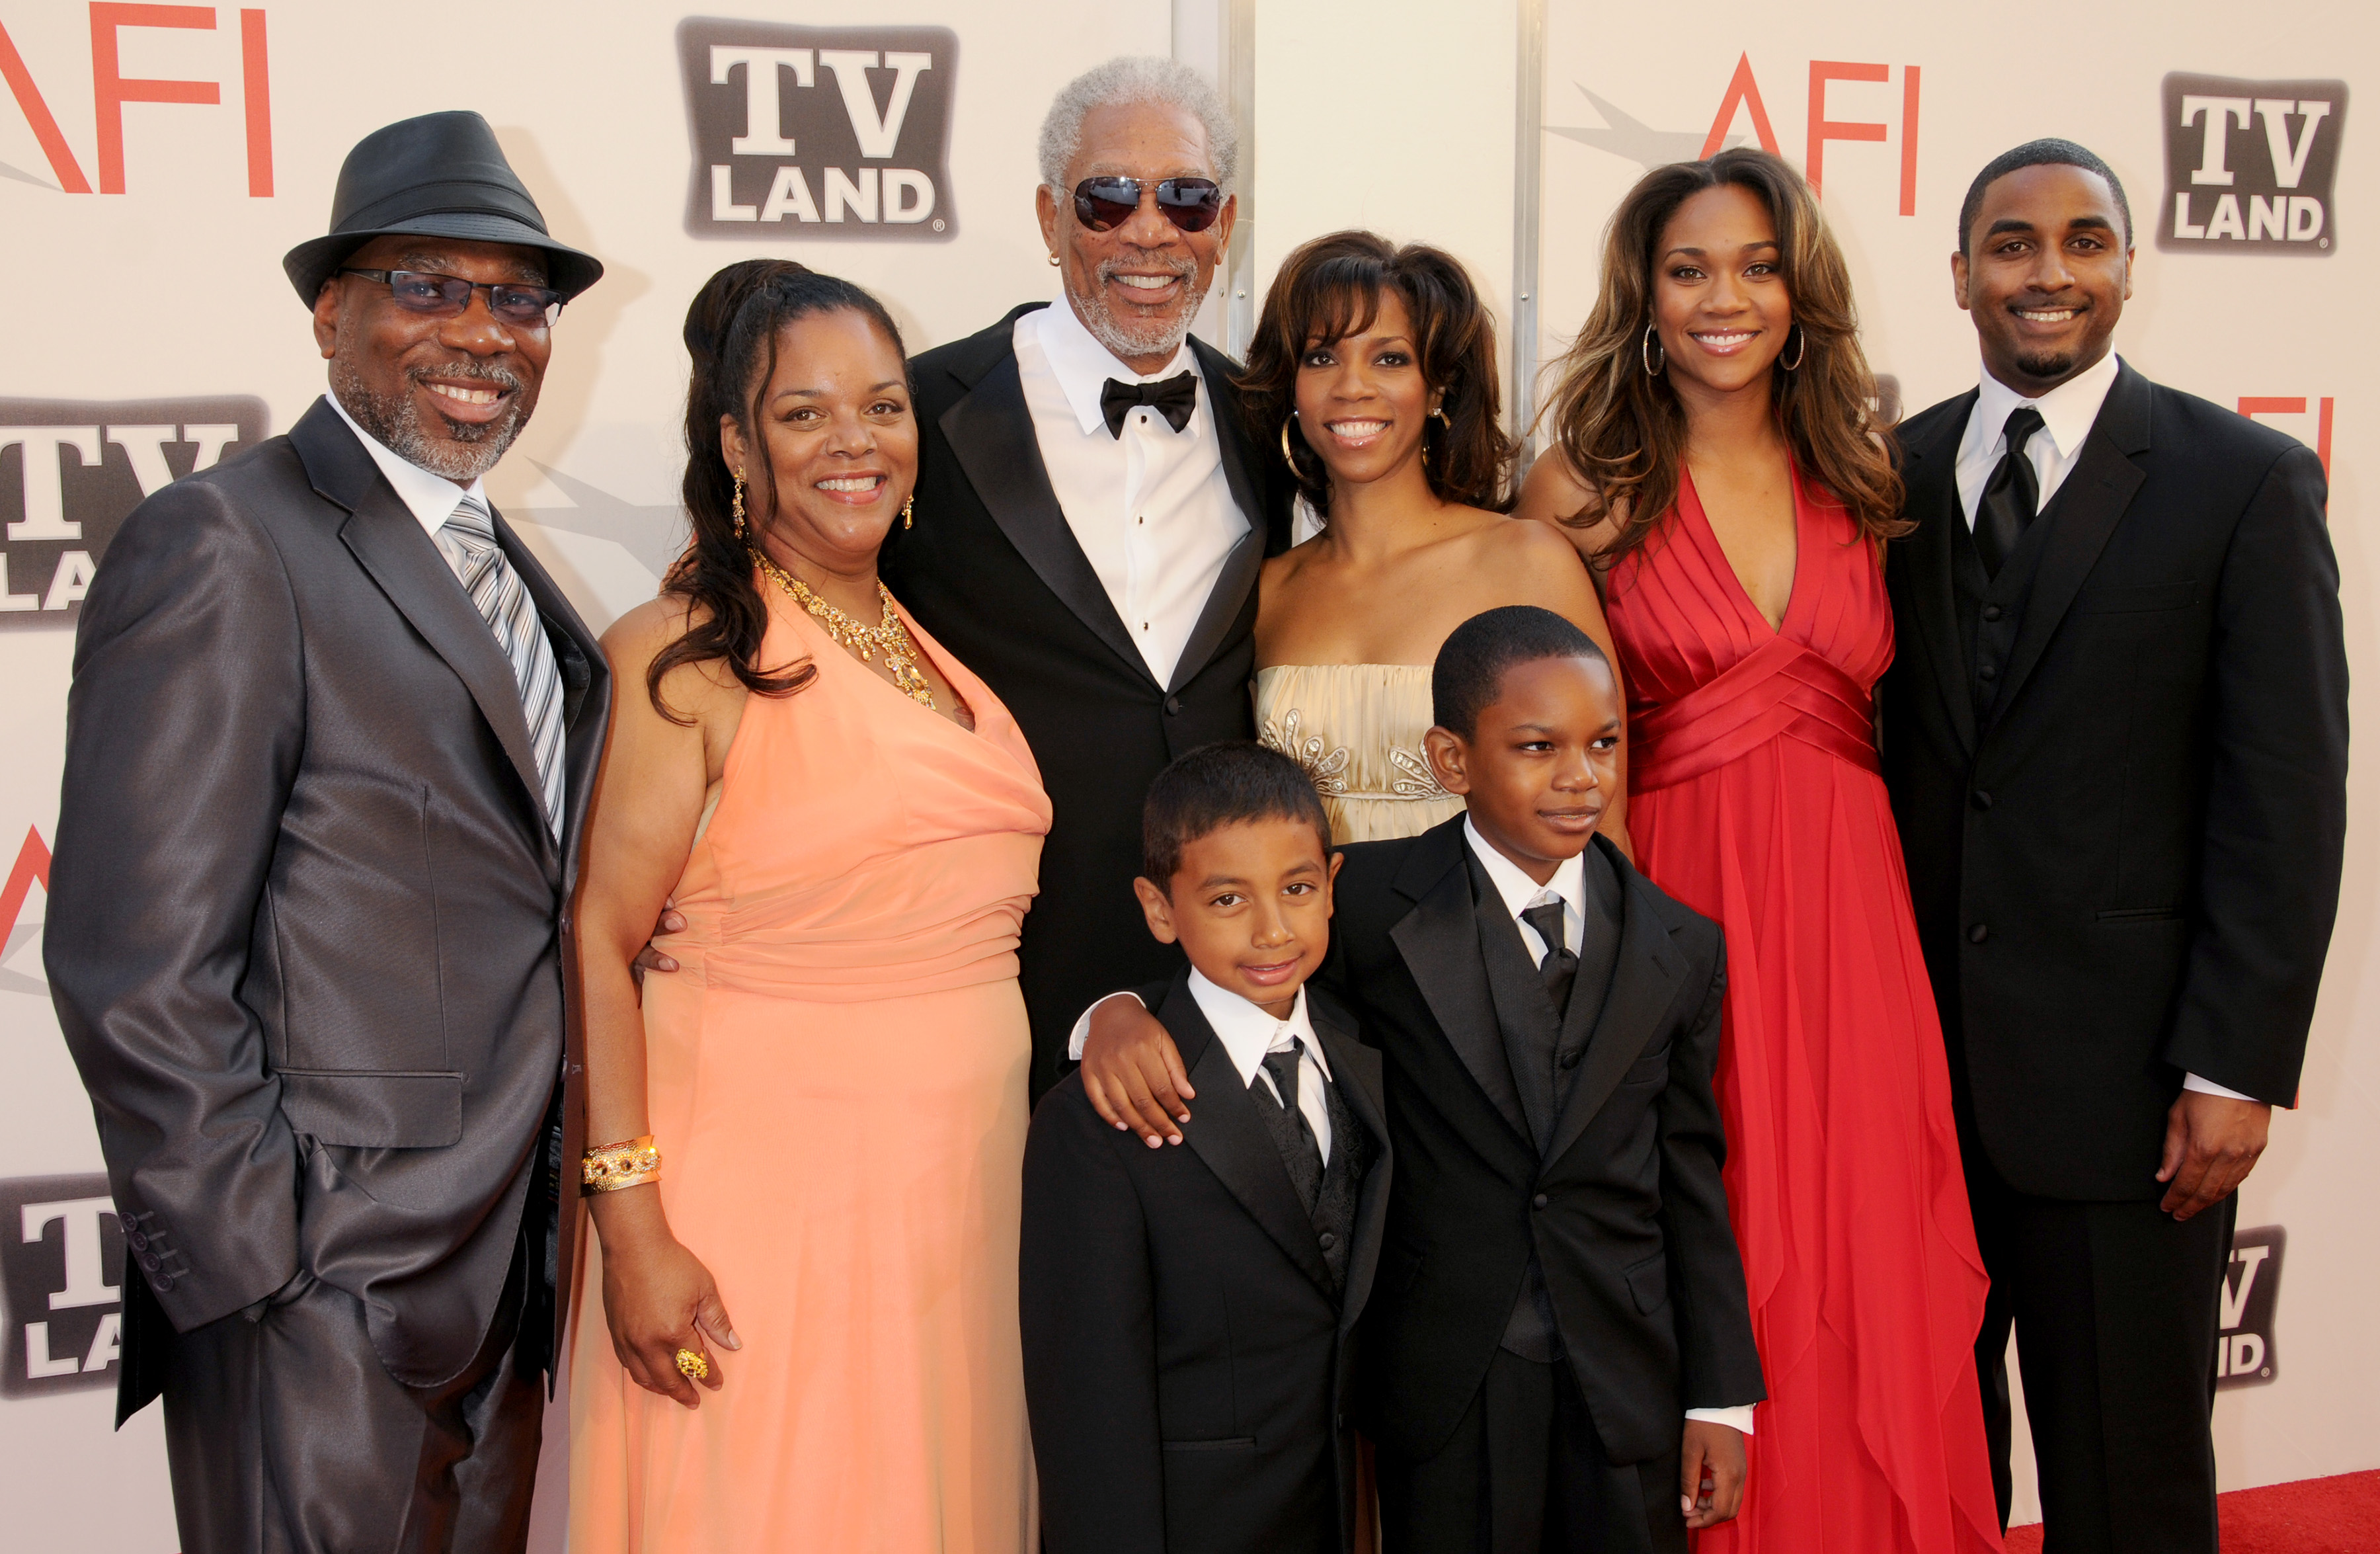 Morgan Freeman with his family at the 39th AFI Life Achievement Awards in Culver City, California on June 9, 2011 | Source: Getty Images